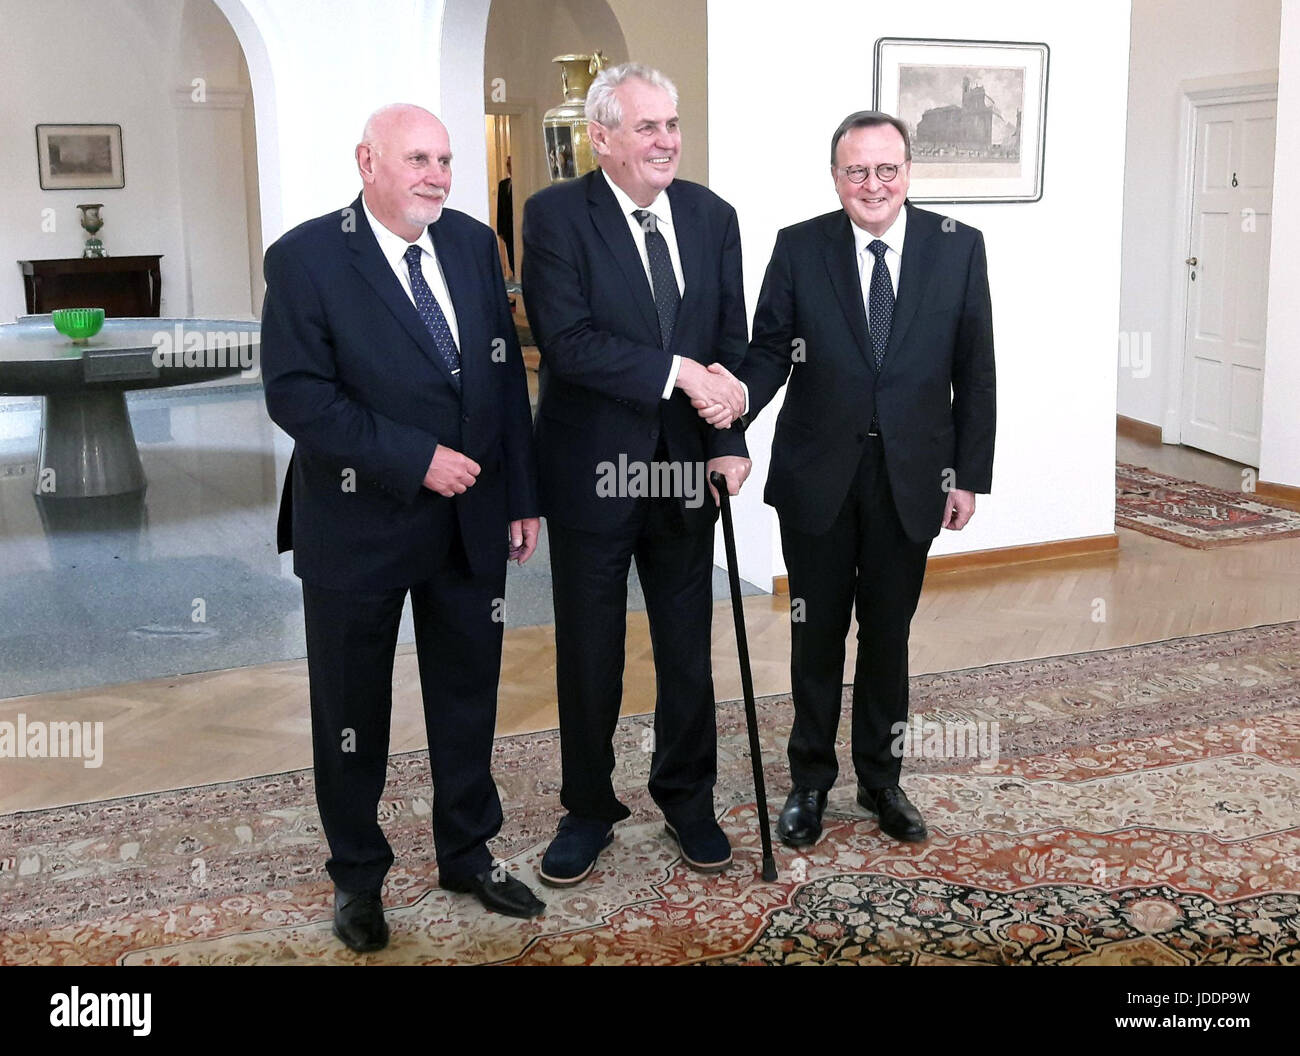 Czech President Milos Zeman, centre, meets EHRC President Guido Raimondi, right, and Czech Constitutional Court (US) chairman Pavel Rychetsky, left, at Prague Castle, Czech Republic, on Monday, June 19, 2017. The level of human rights observance in the Czech Republic and respect for the European Human Rights Court's (EHRC) judgements were praised by Council of Europe Secretary-General Thorbjorn Jagland and EHRC President Guido Raimondi today. They both are attending a specialist conference on the binding character of courts' decisions. Czech Constitutional Court (US) chairman Pavel Rychetsky Stock Photo